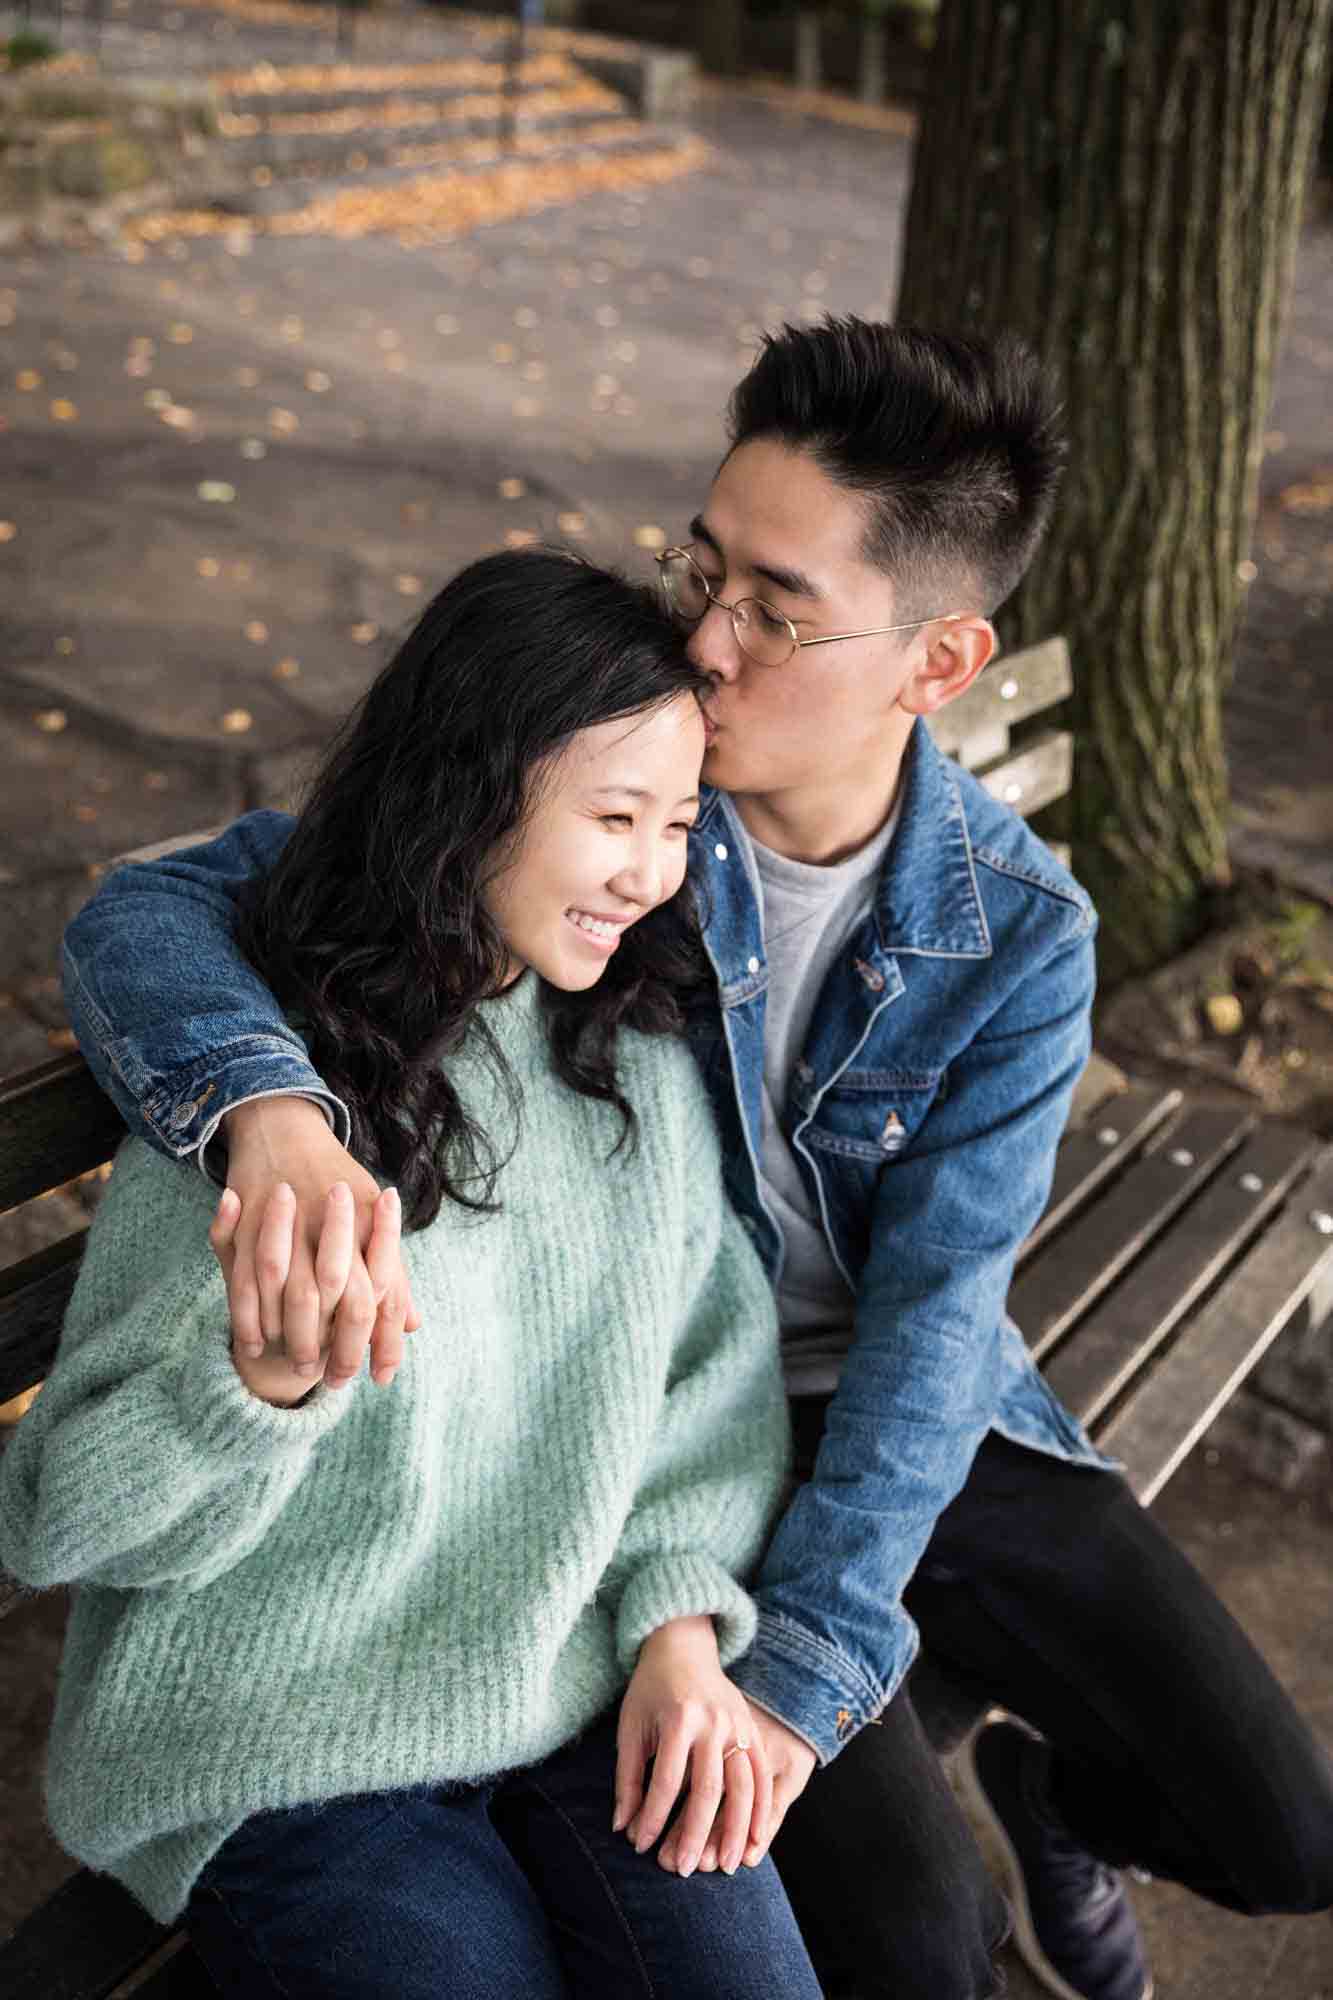 Fort Tryon Park engagement photo of man kissing woman on the side of the head on a bench